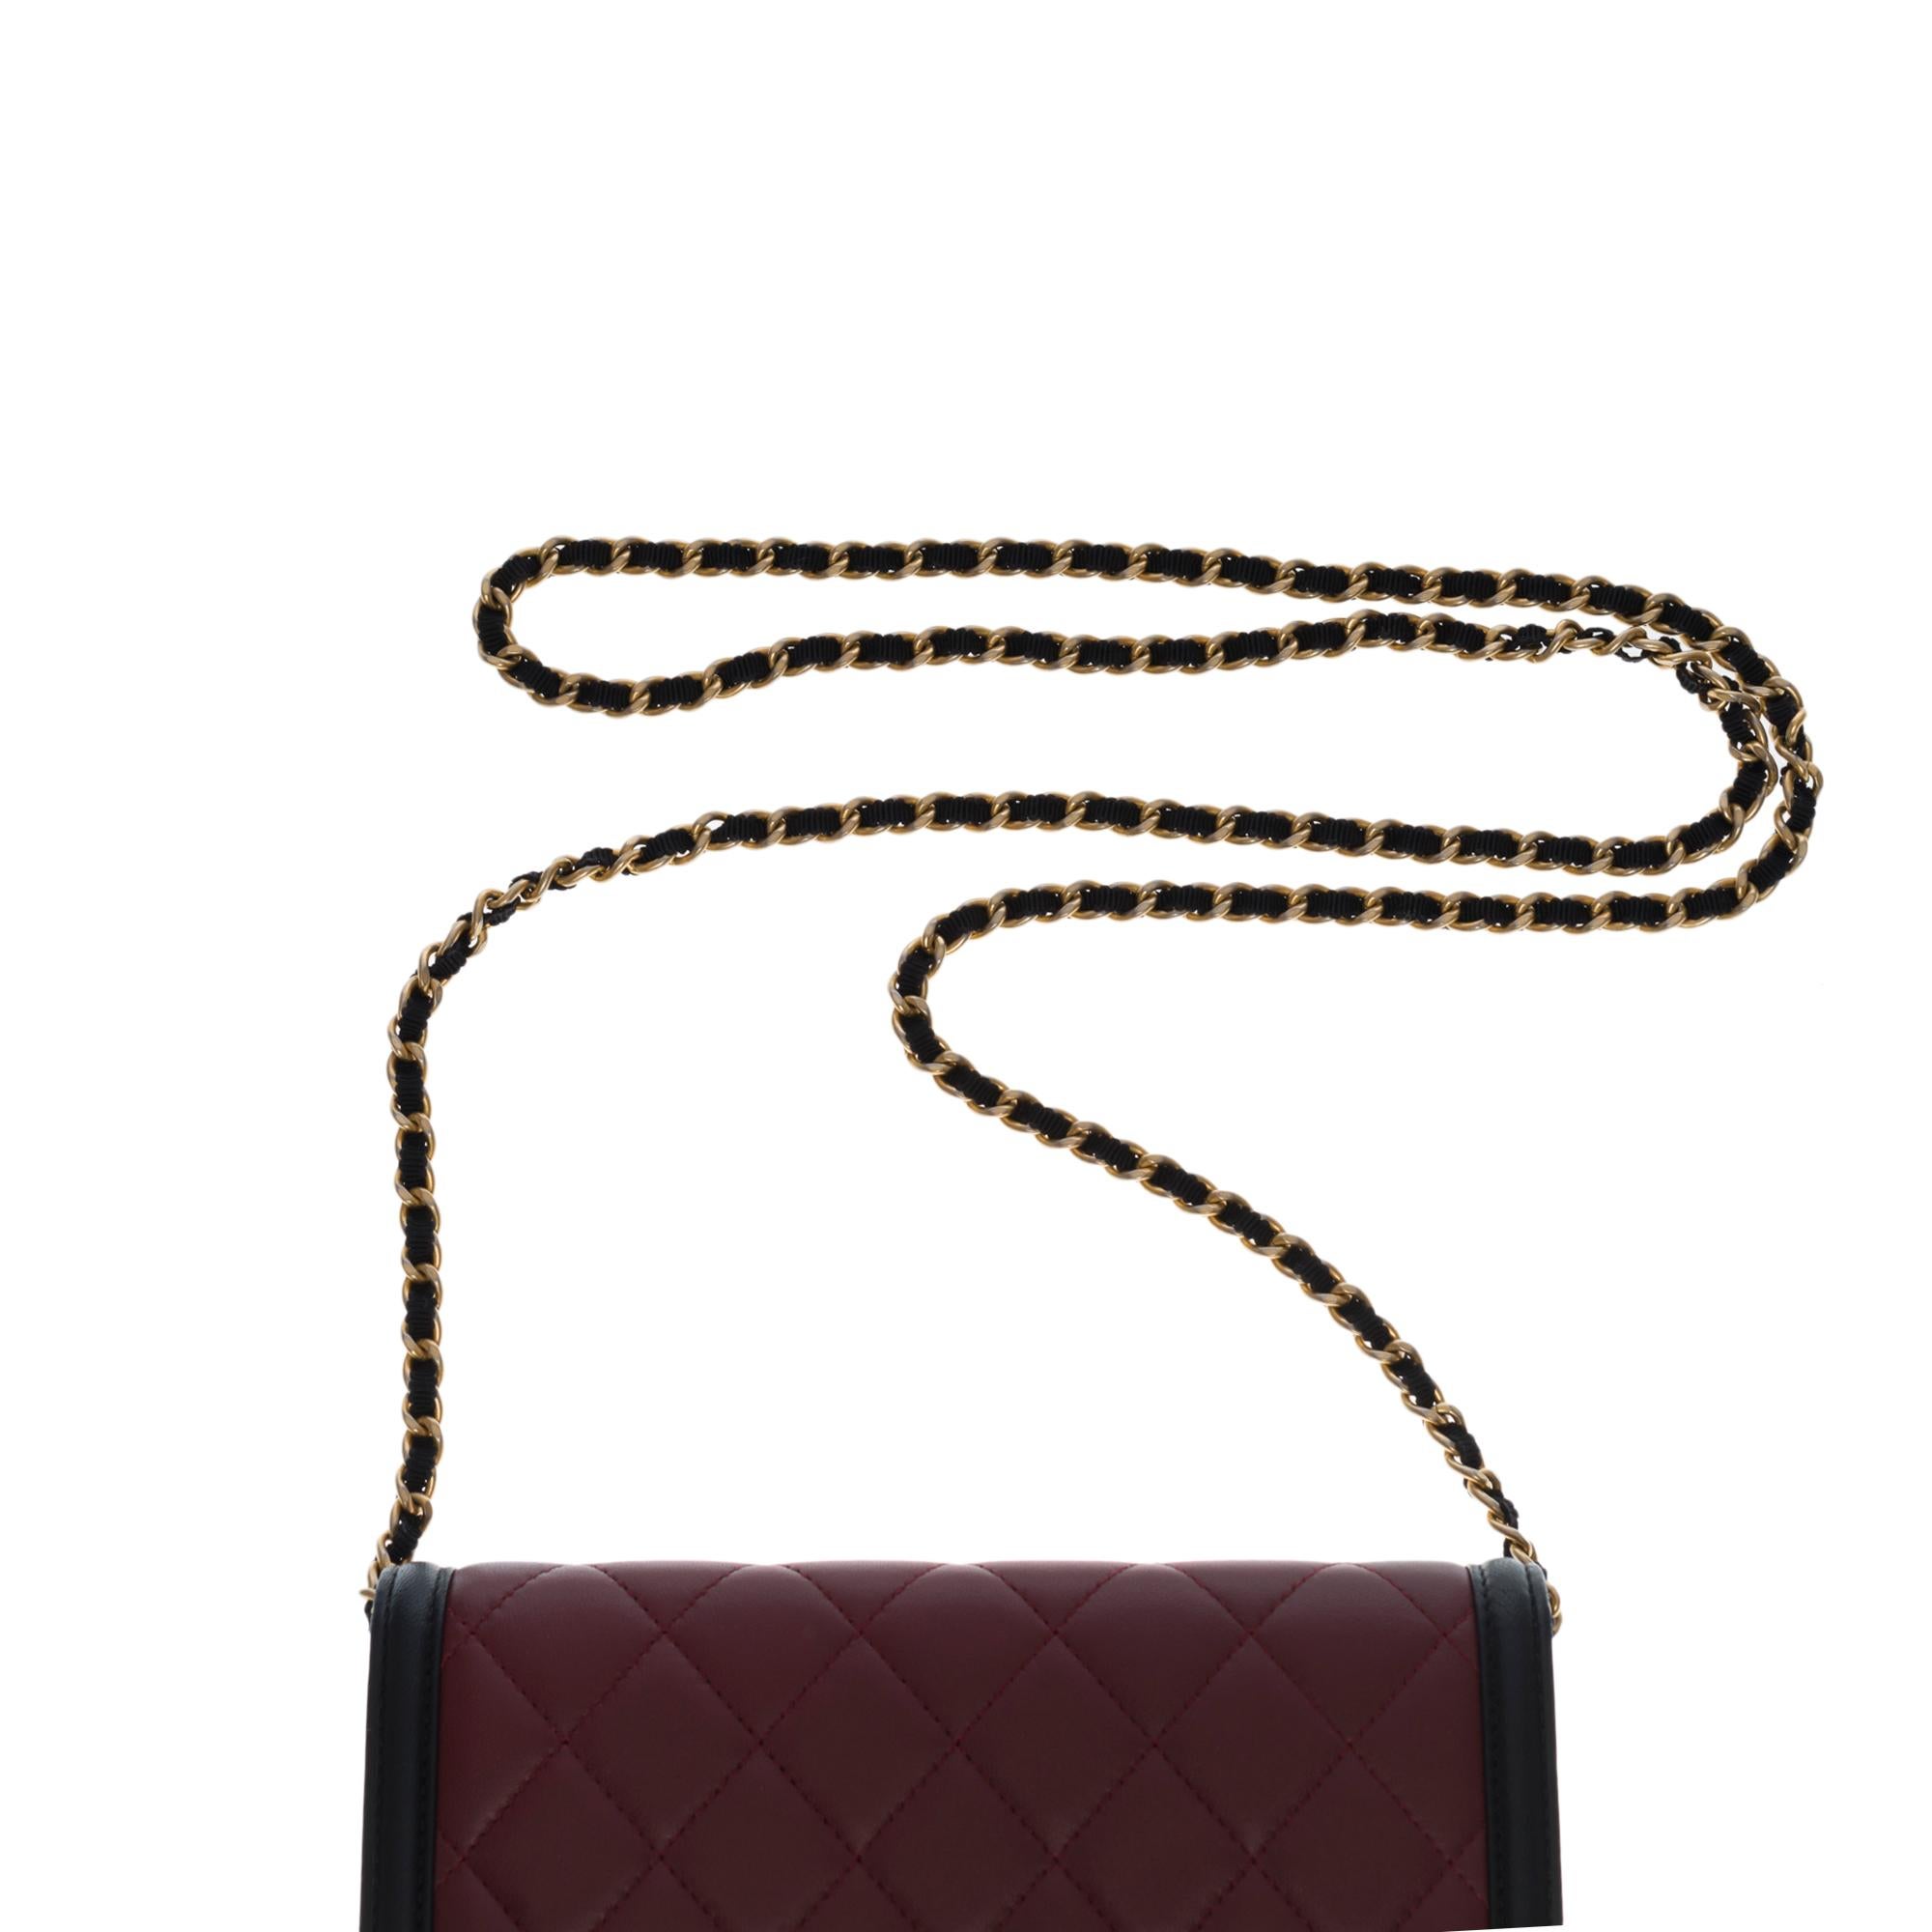 Women's Chanel Wallet on Chain shoulder bag in burgundy/black quilted leather, GHW